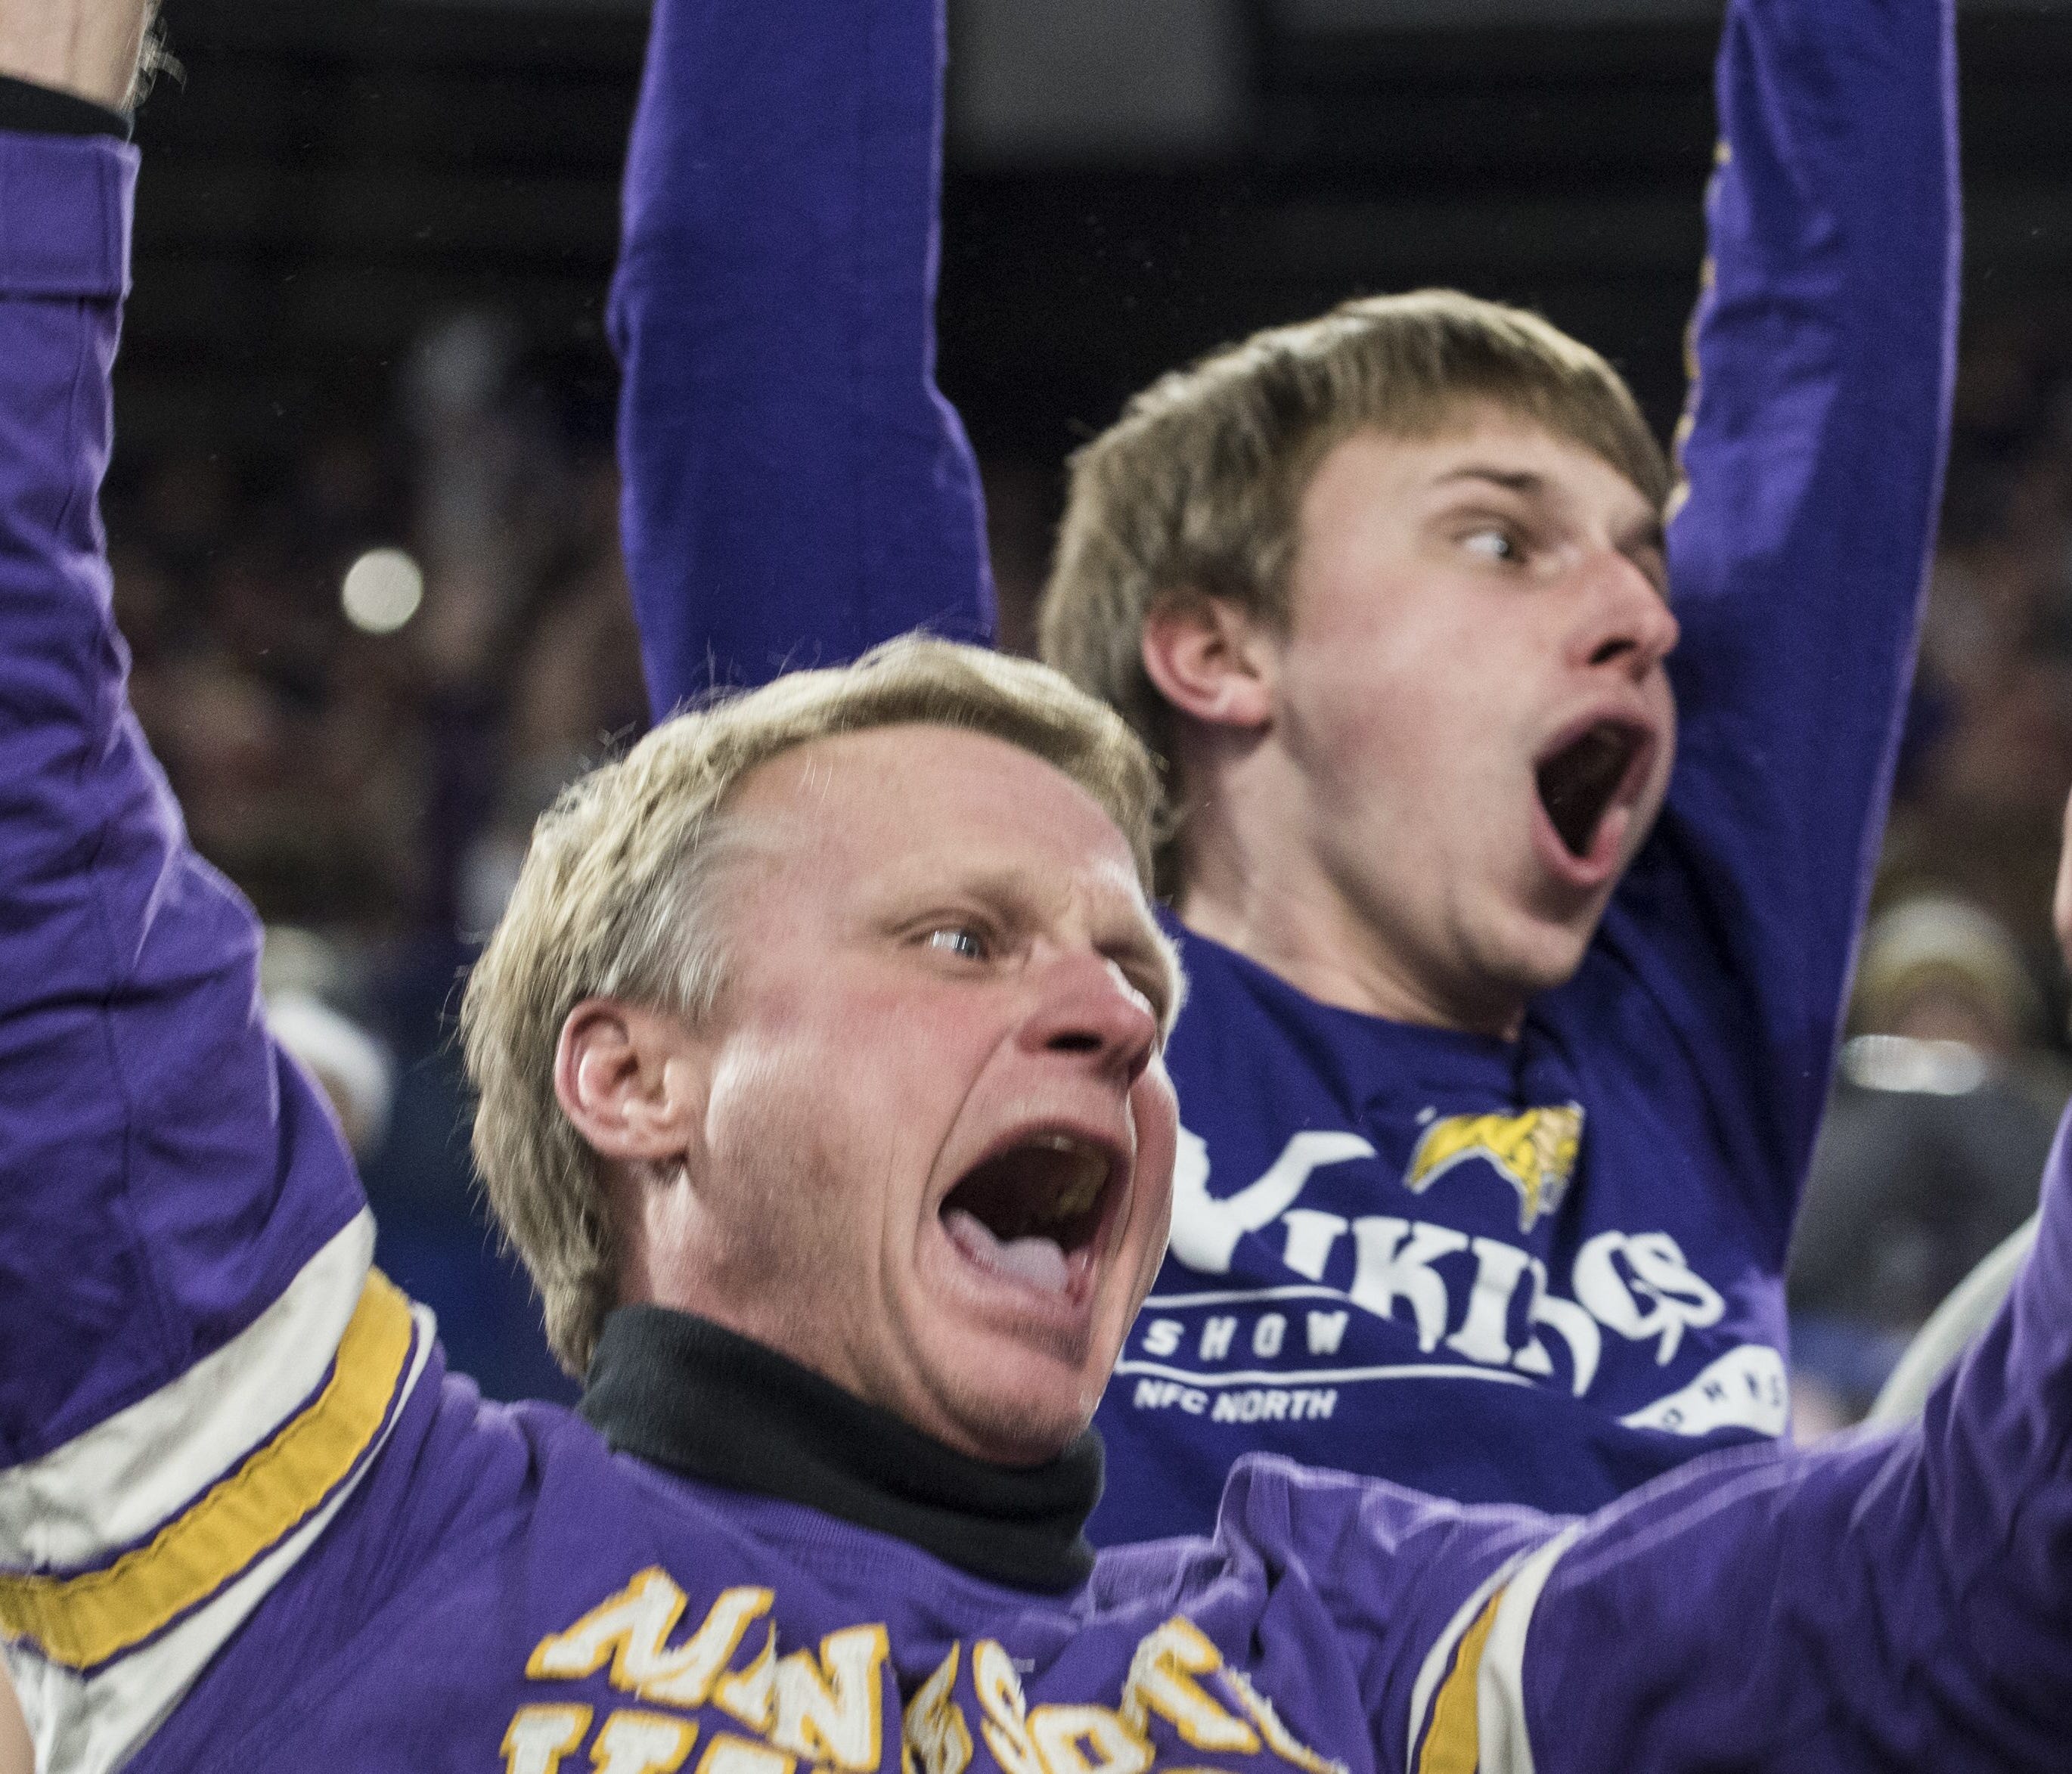 MINNEAPOLIS, MN - JANUARY 14: Fans react after Stefon Diggs #14 of the Minnesota Vikings scored a 61 yard touchdown at the end of the fourth quarter of the NFC Divisional Playoff game against the New Orleans Saints on January 14, 2018 at U.S. Bank St